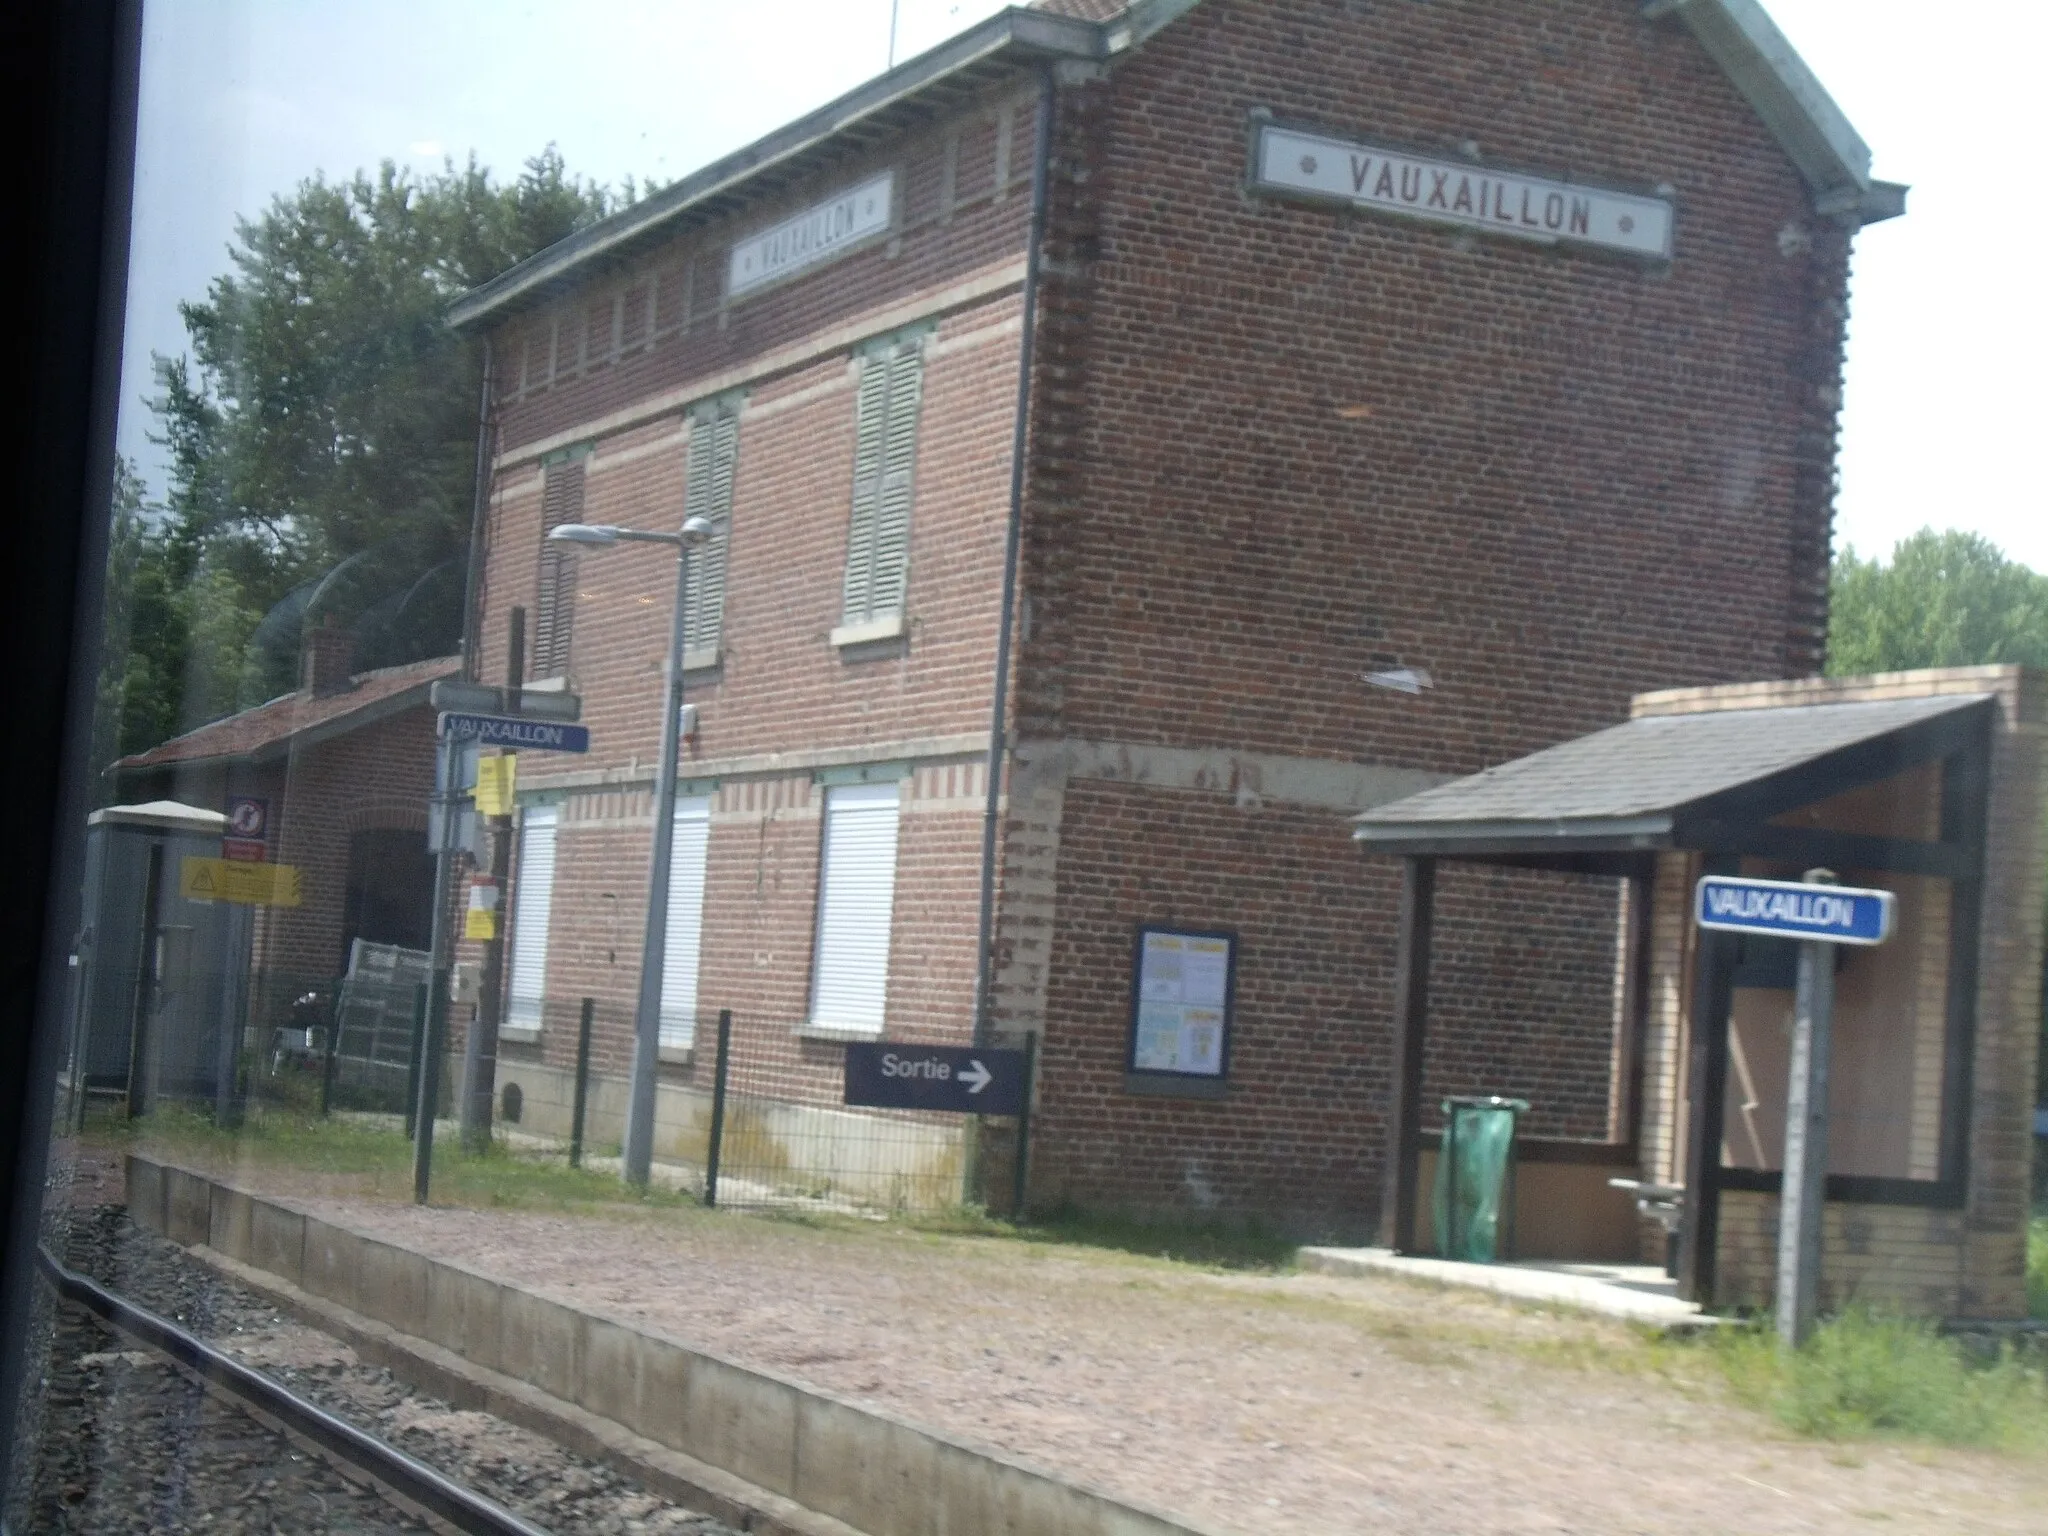 Photo showing: Vauxaillon station from the train